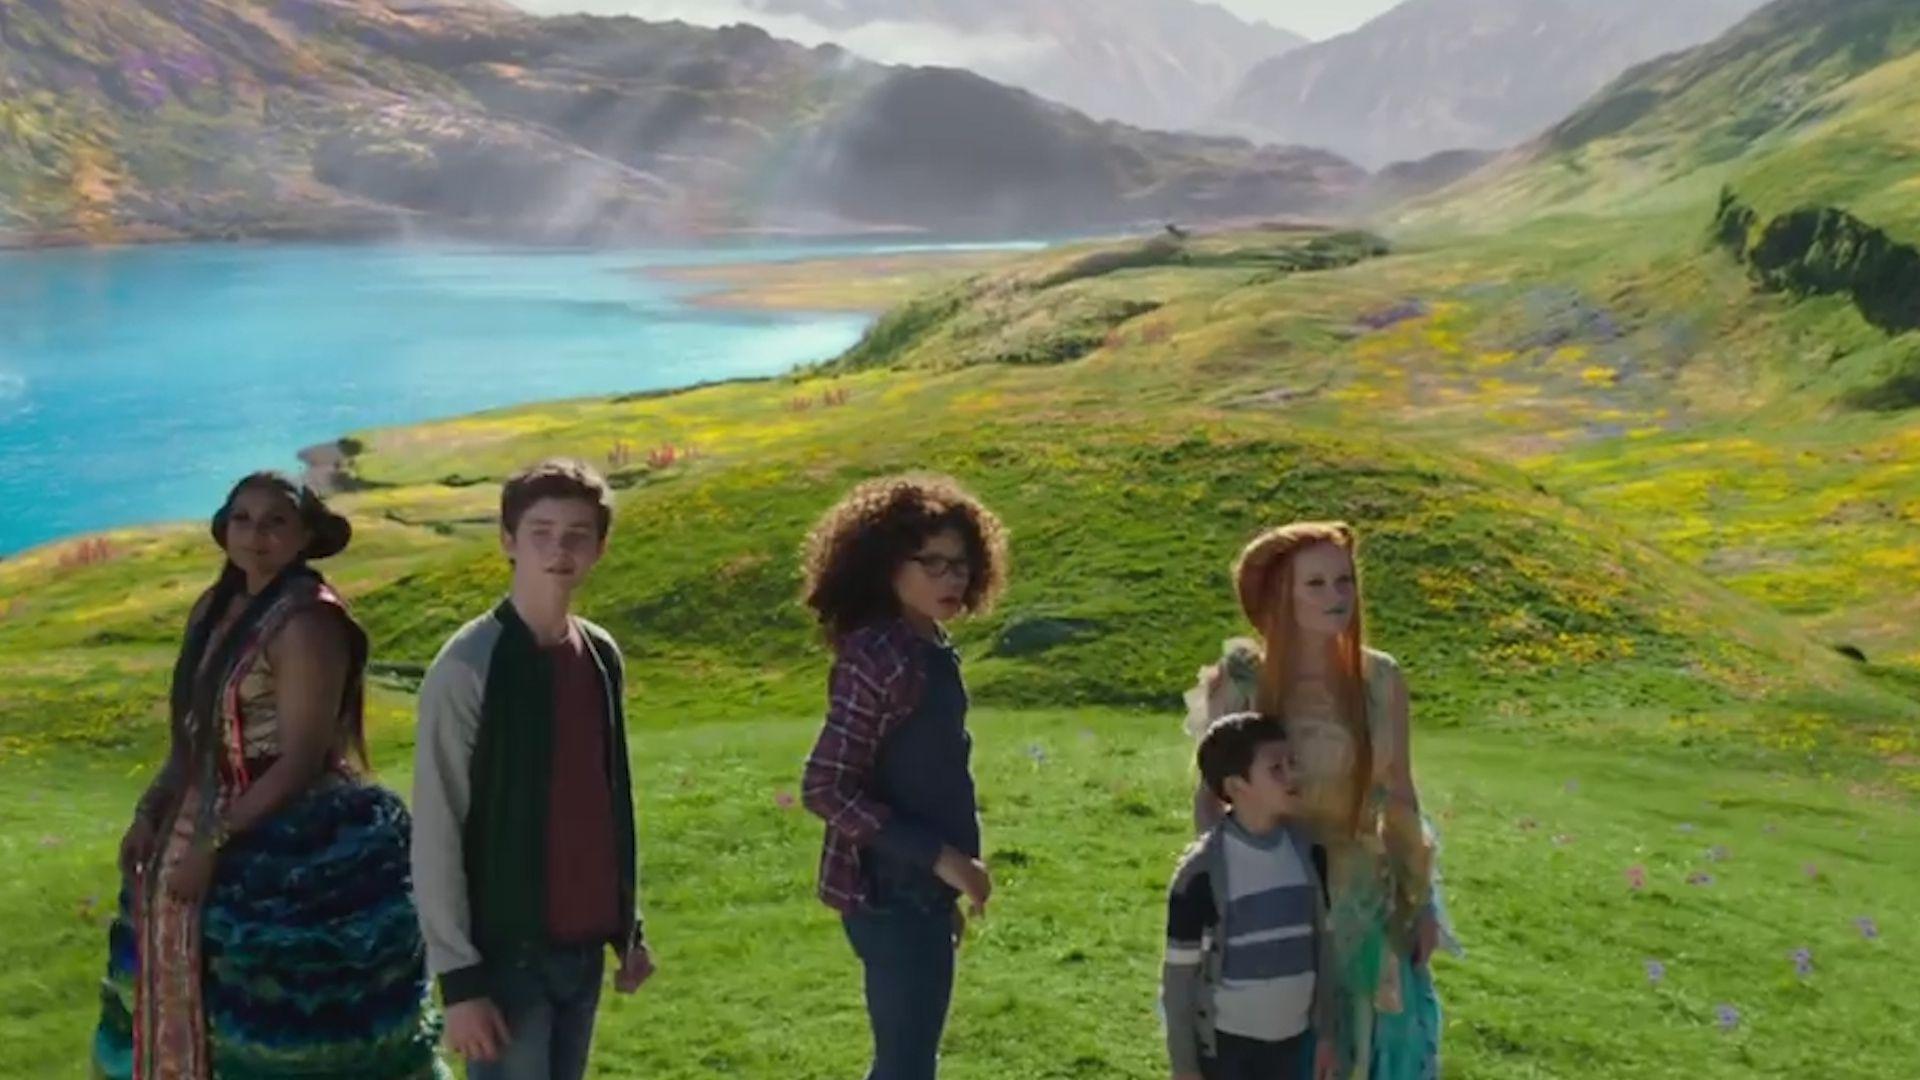 Time's 'A Wrinkle in Time' cover is just what we needed right now